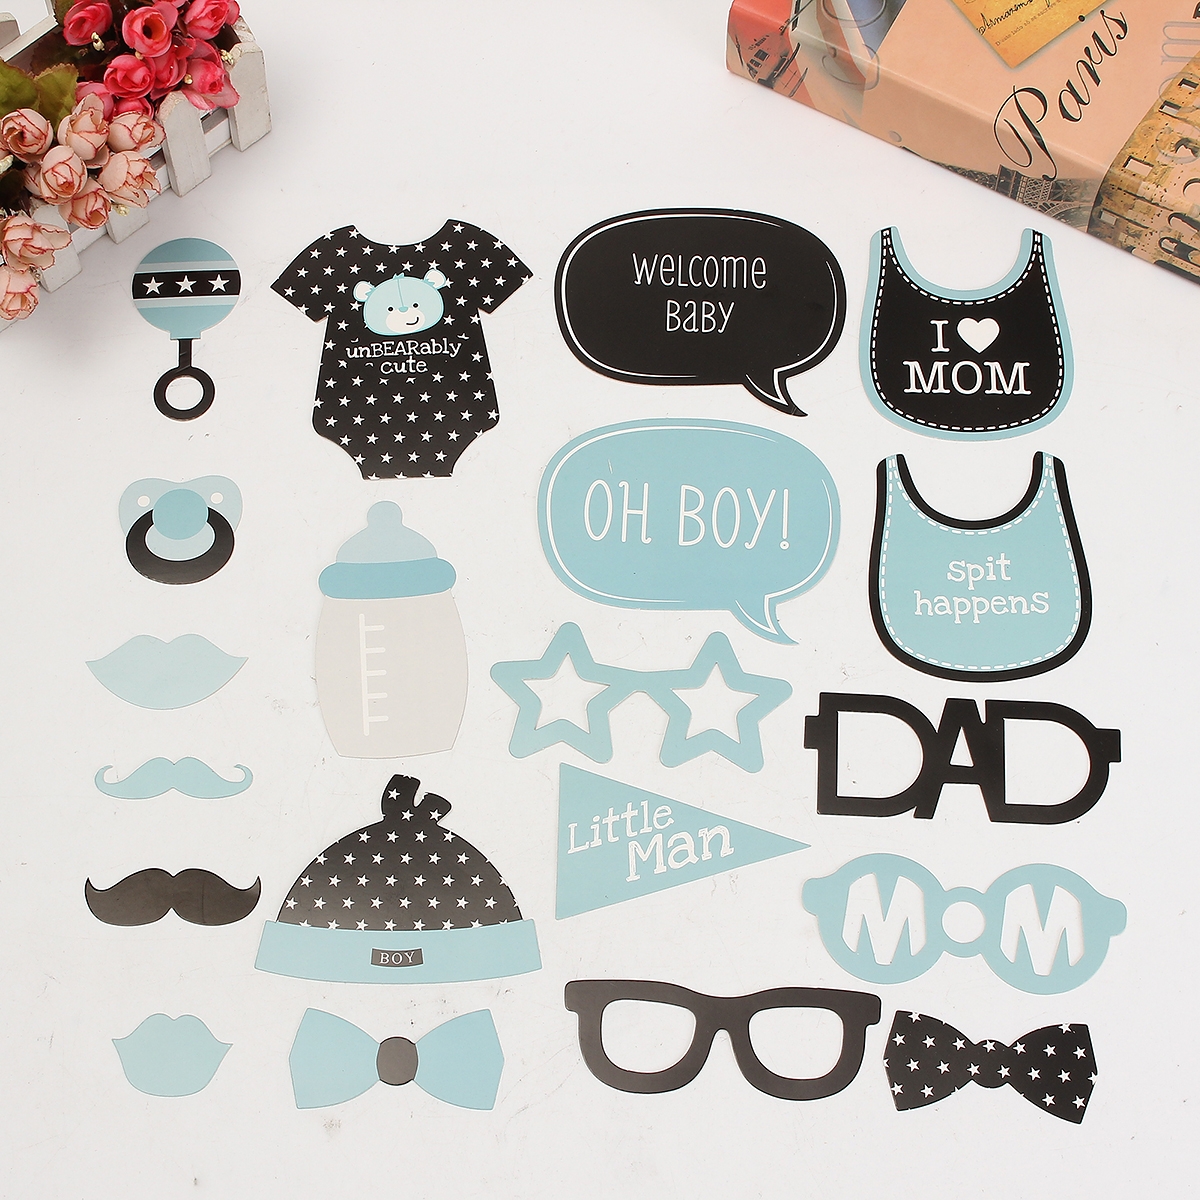 Baby Child Birthday Party Funny Interesting Photo Paper Beard Props